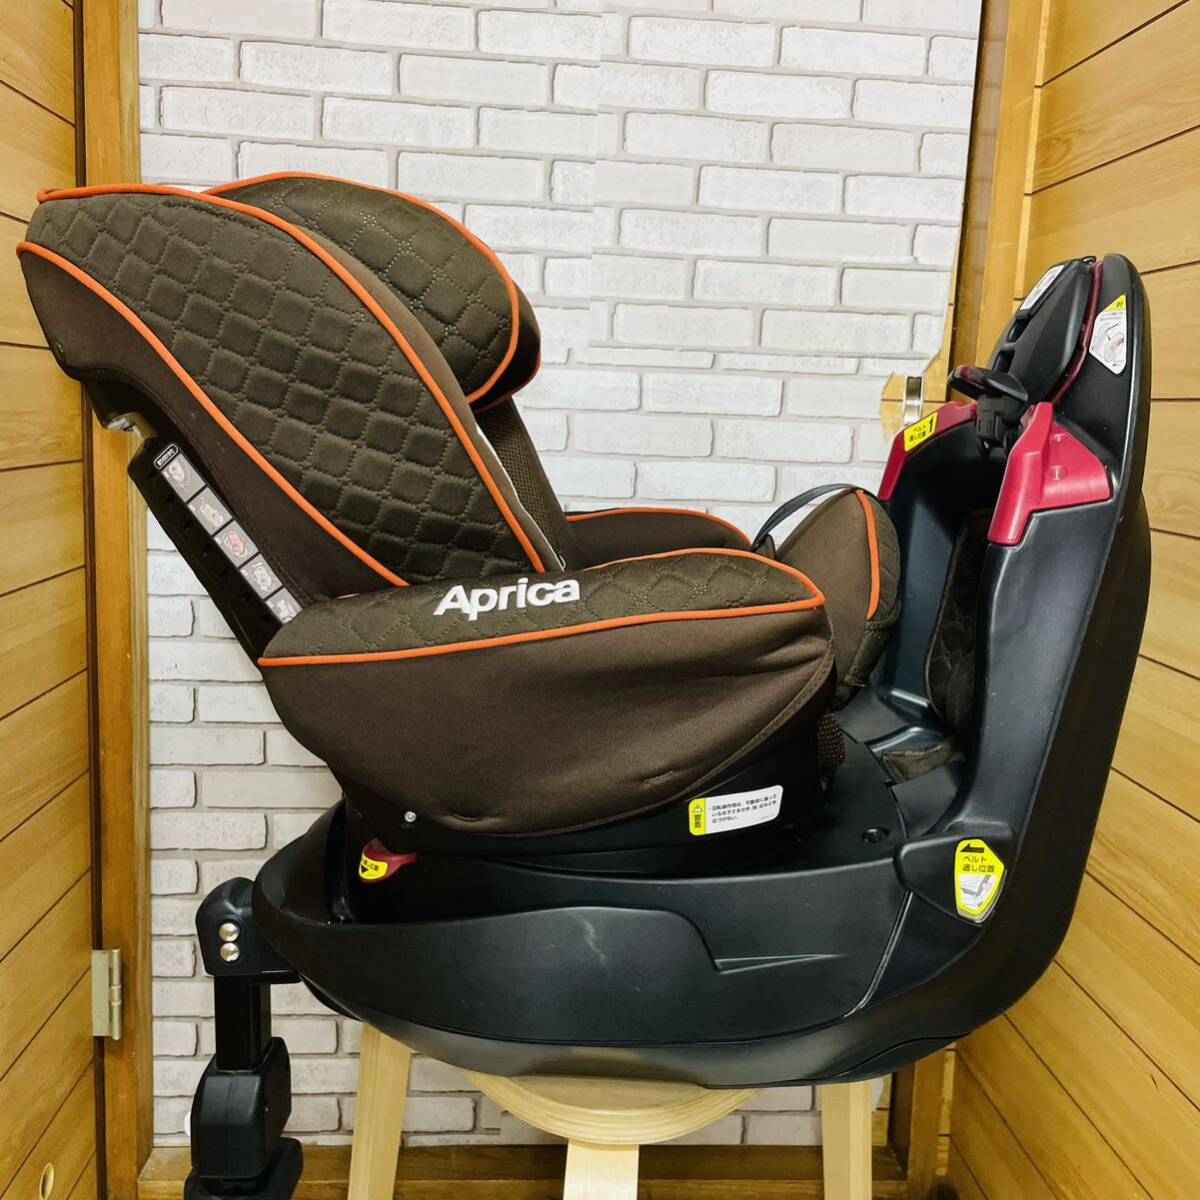  prompt decision use 5 months beautiful goods Aprica Furadia Glo u premium child seat postage included 5100 jpy . discounted lavatory settled Aprica